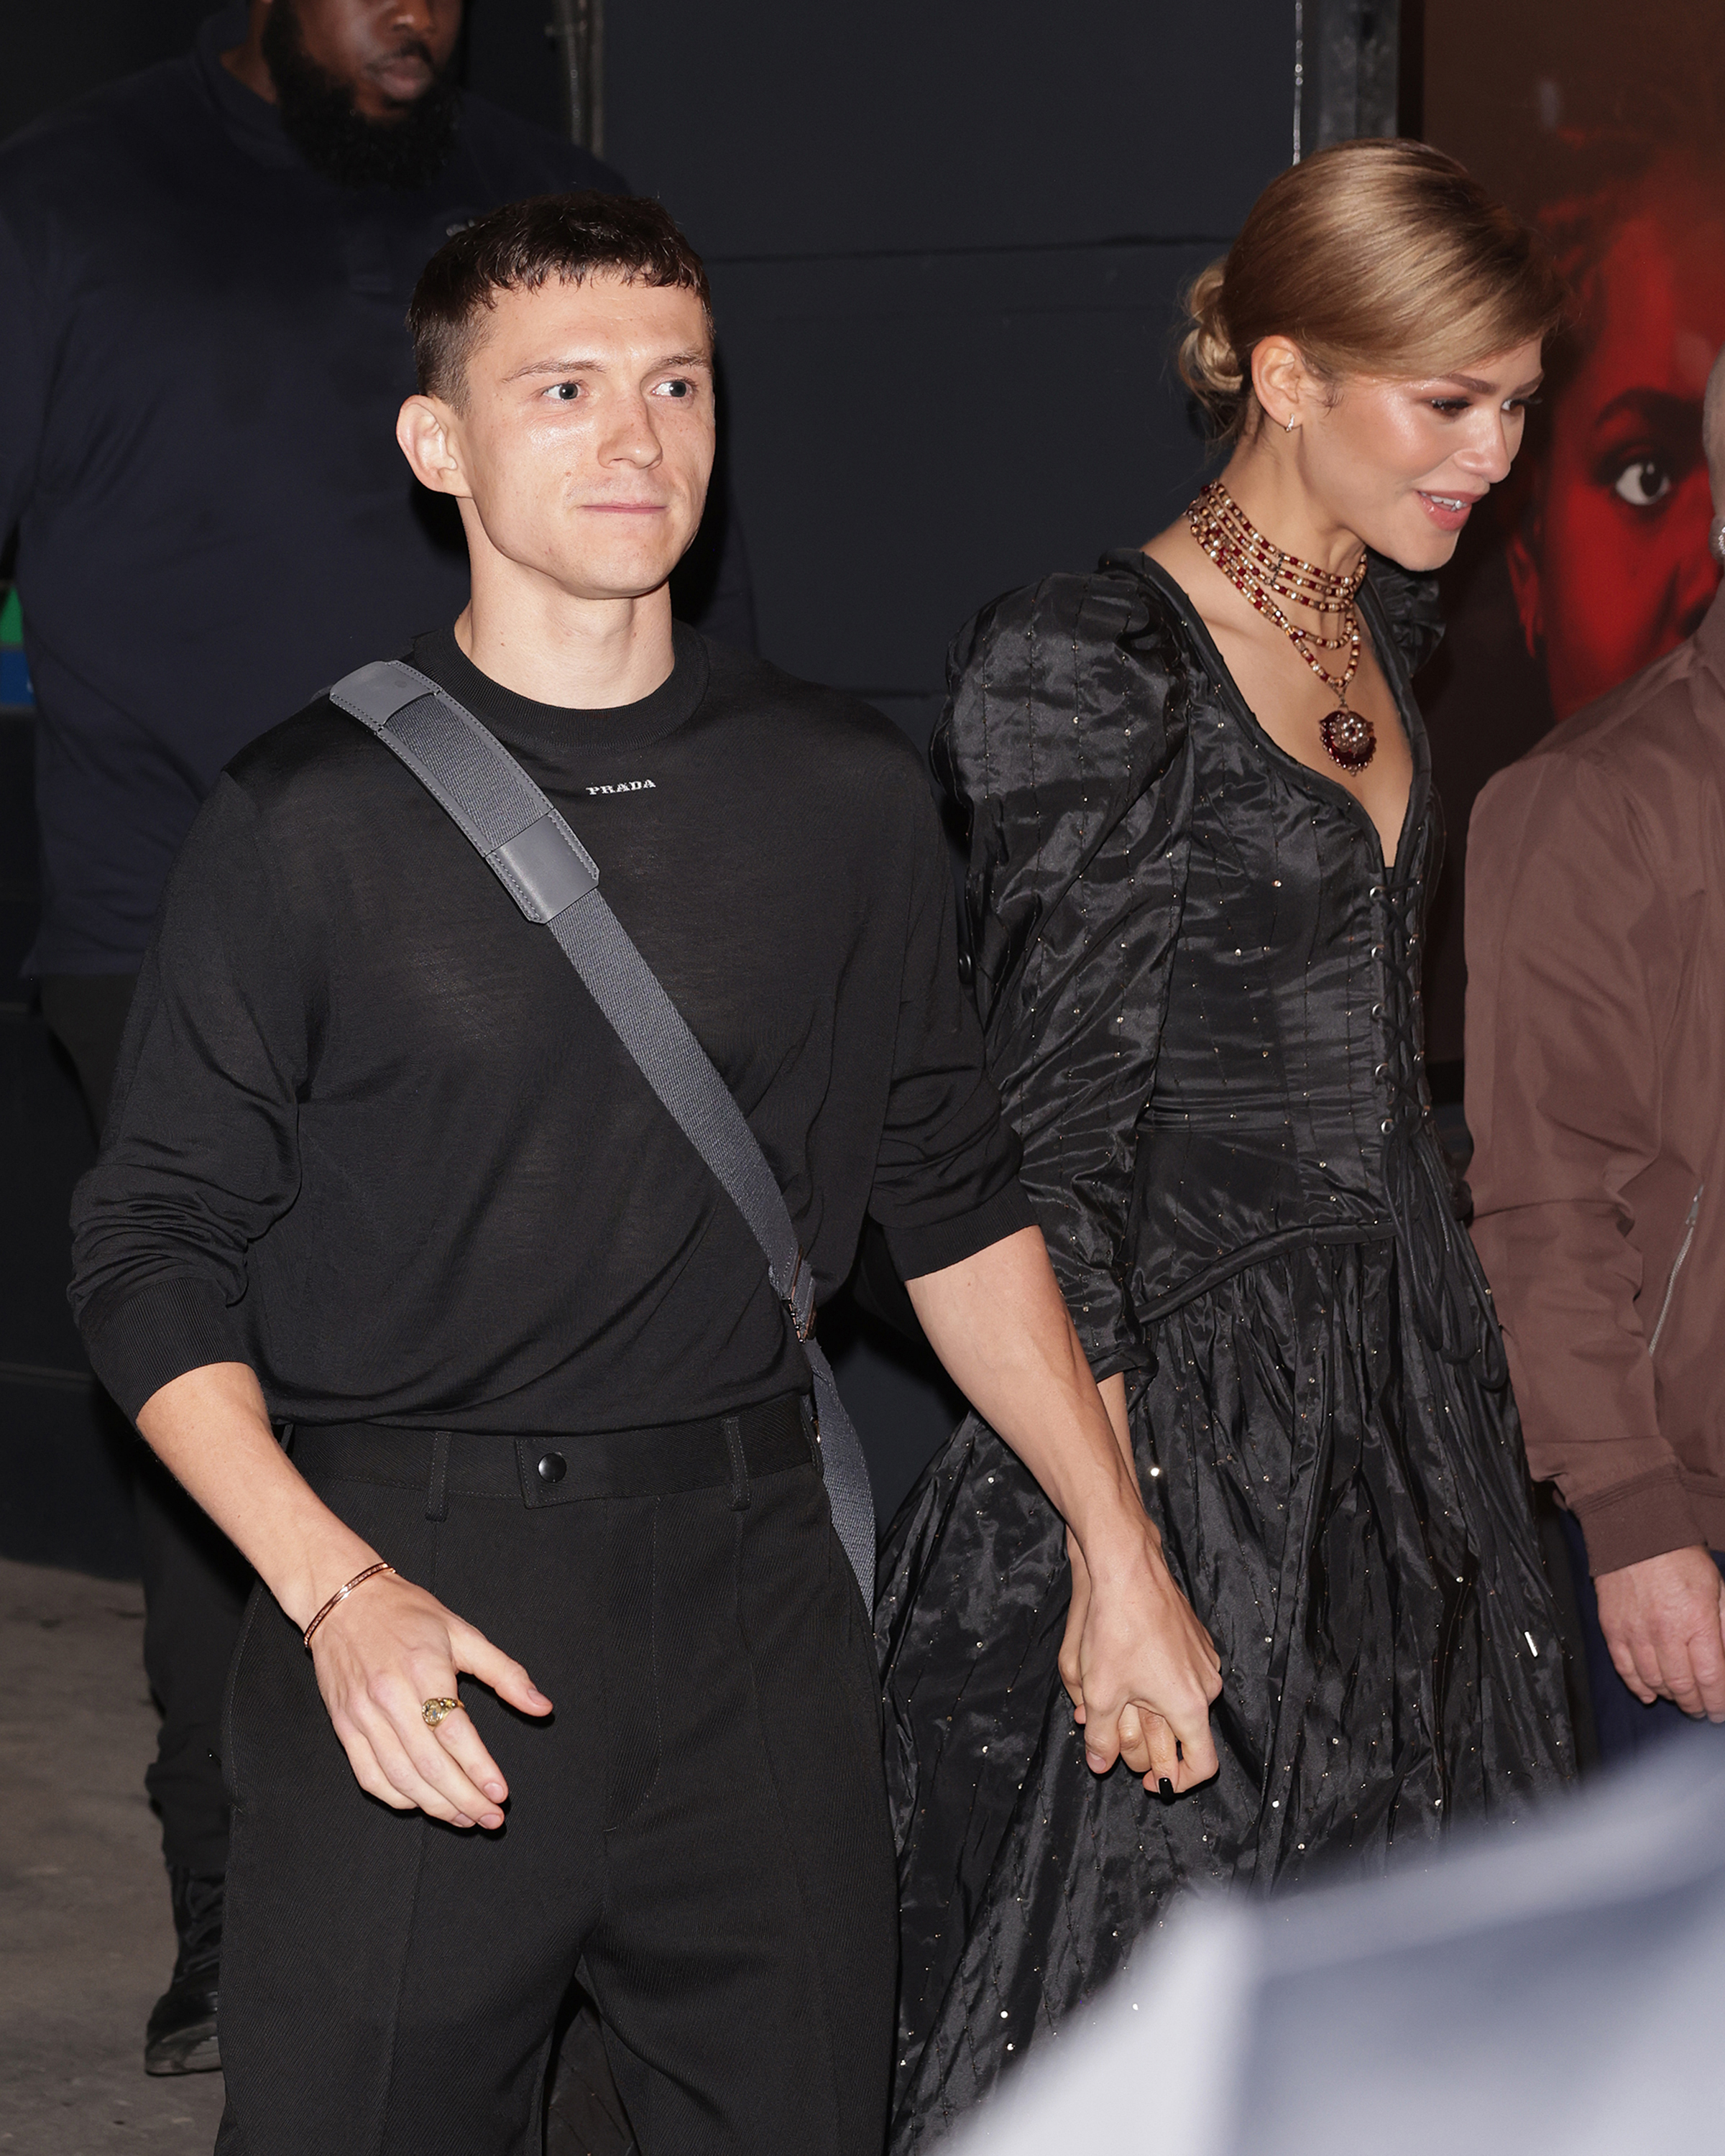 Tom Holland and Zendaya were photographed holding hands as they left a theatre this week